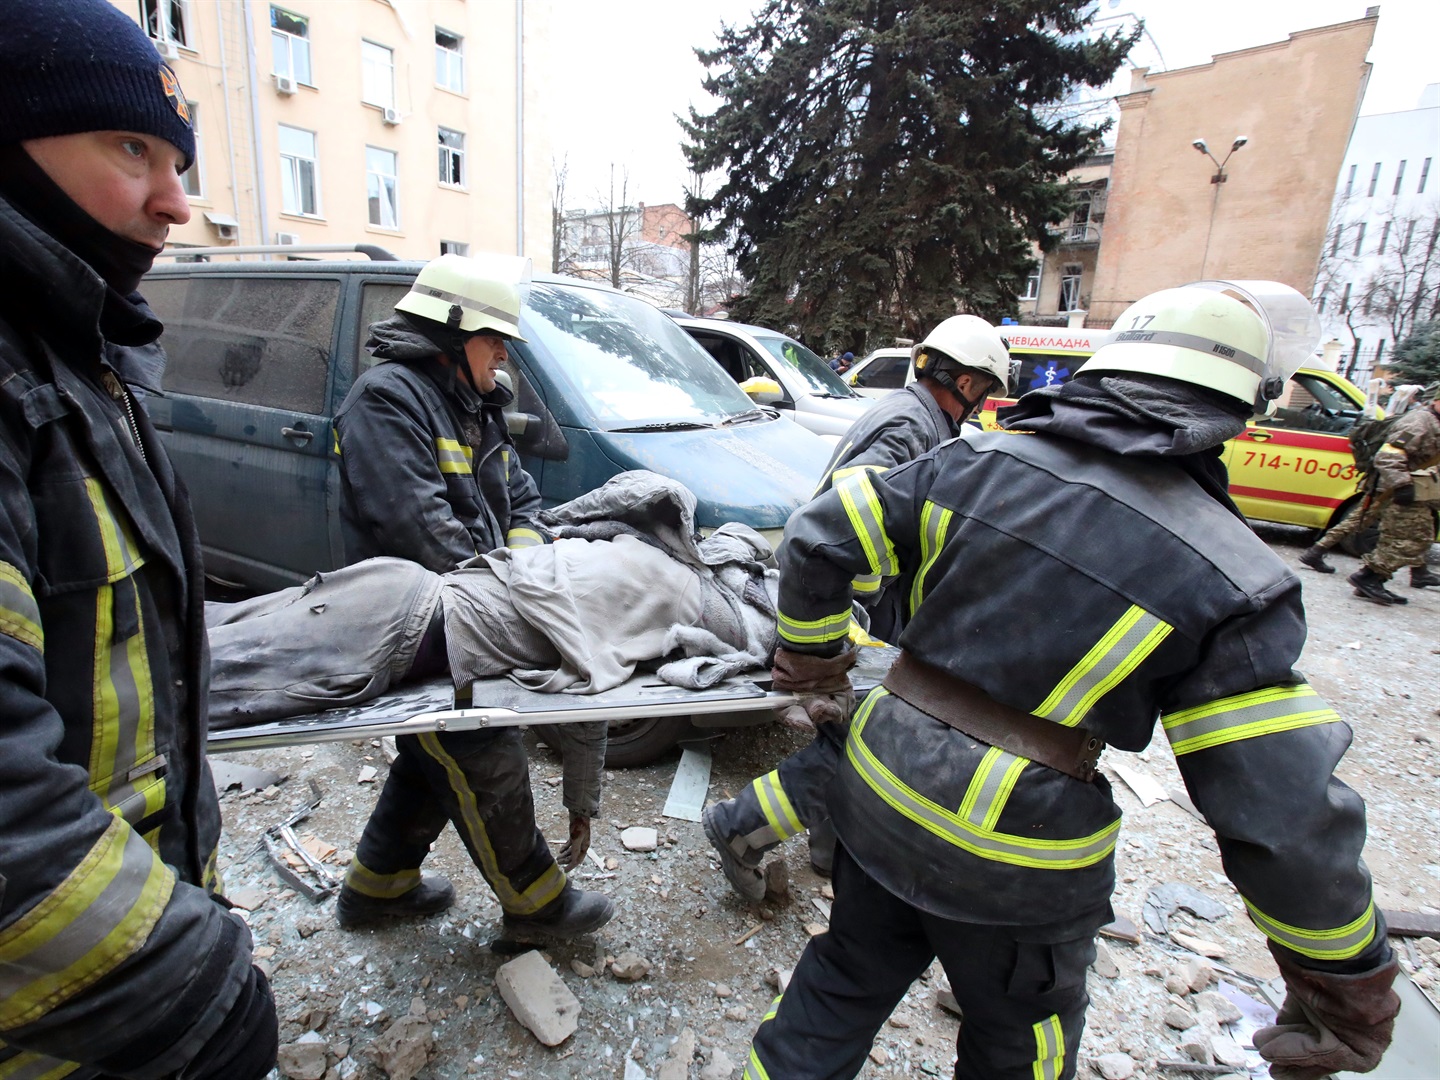 Rescuers carry a wounded person on the stretcher as they respond to shelling by Russian troops of central Kharkiv, northeastern Ukraine, on March 1, 2022.